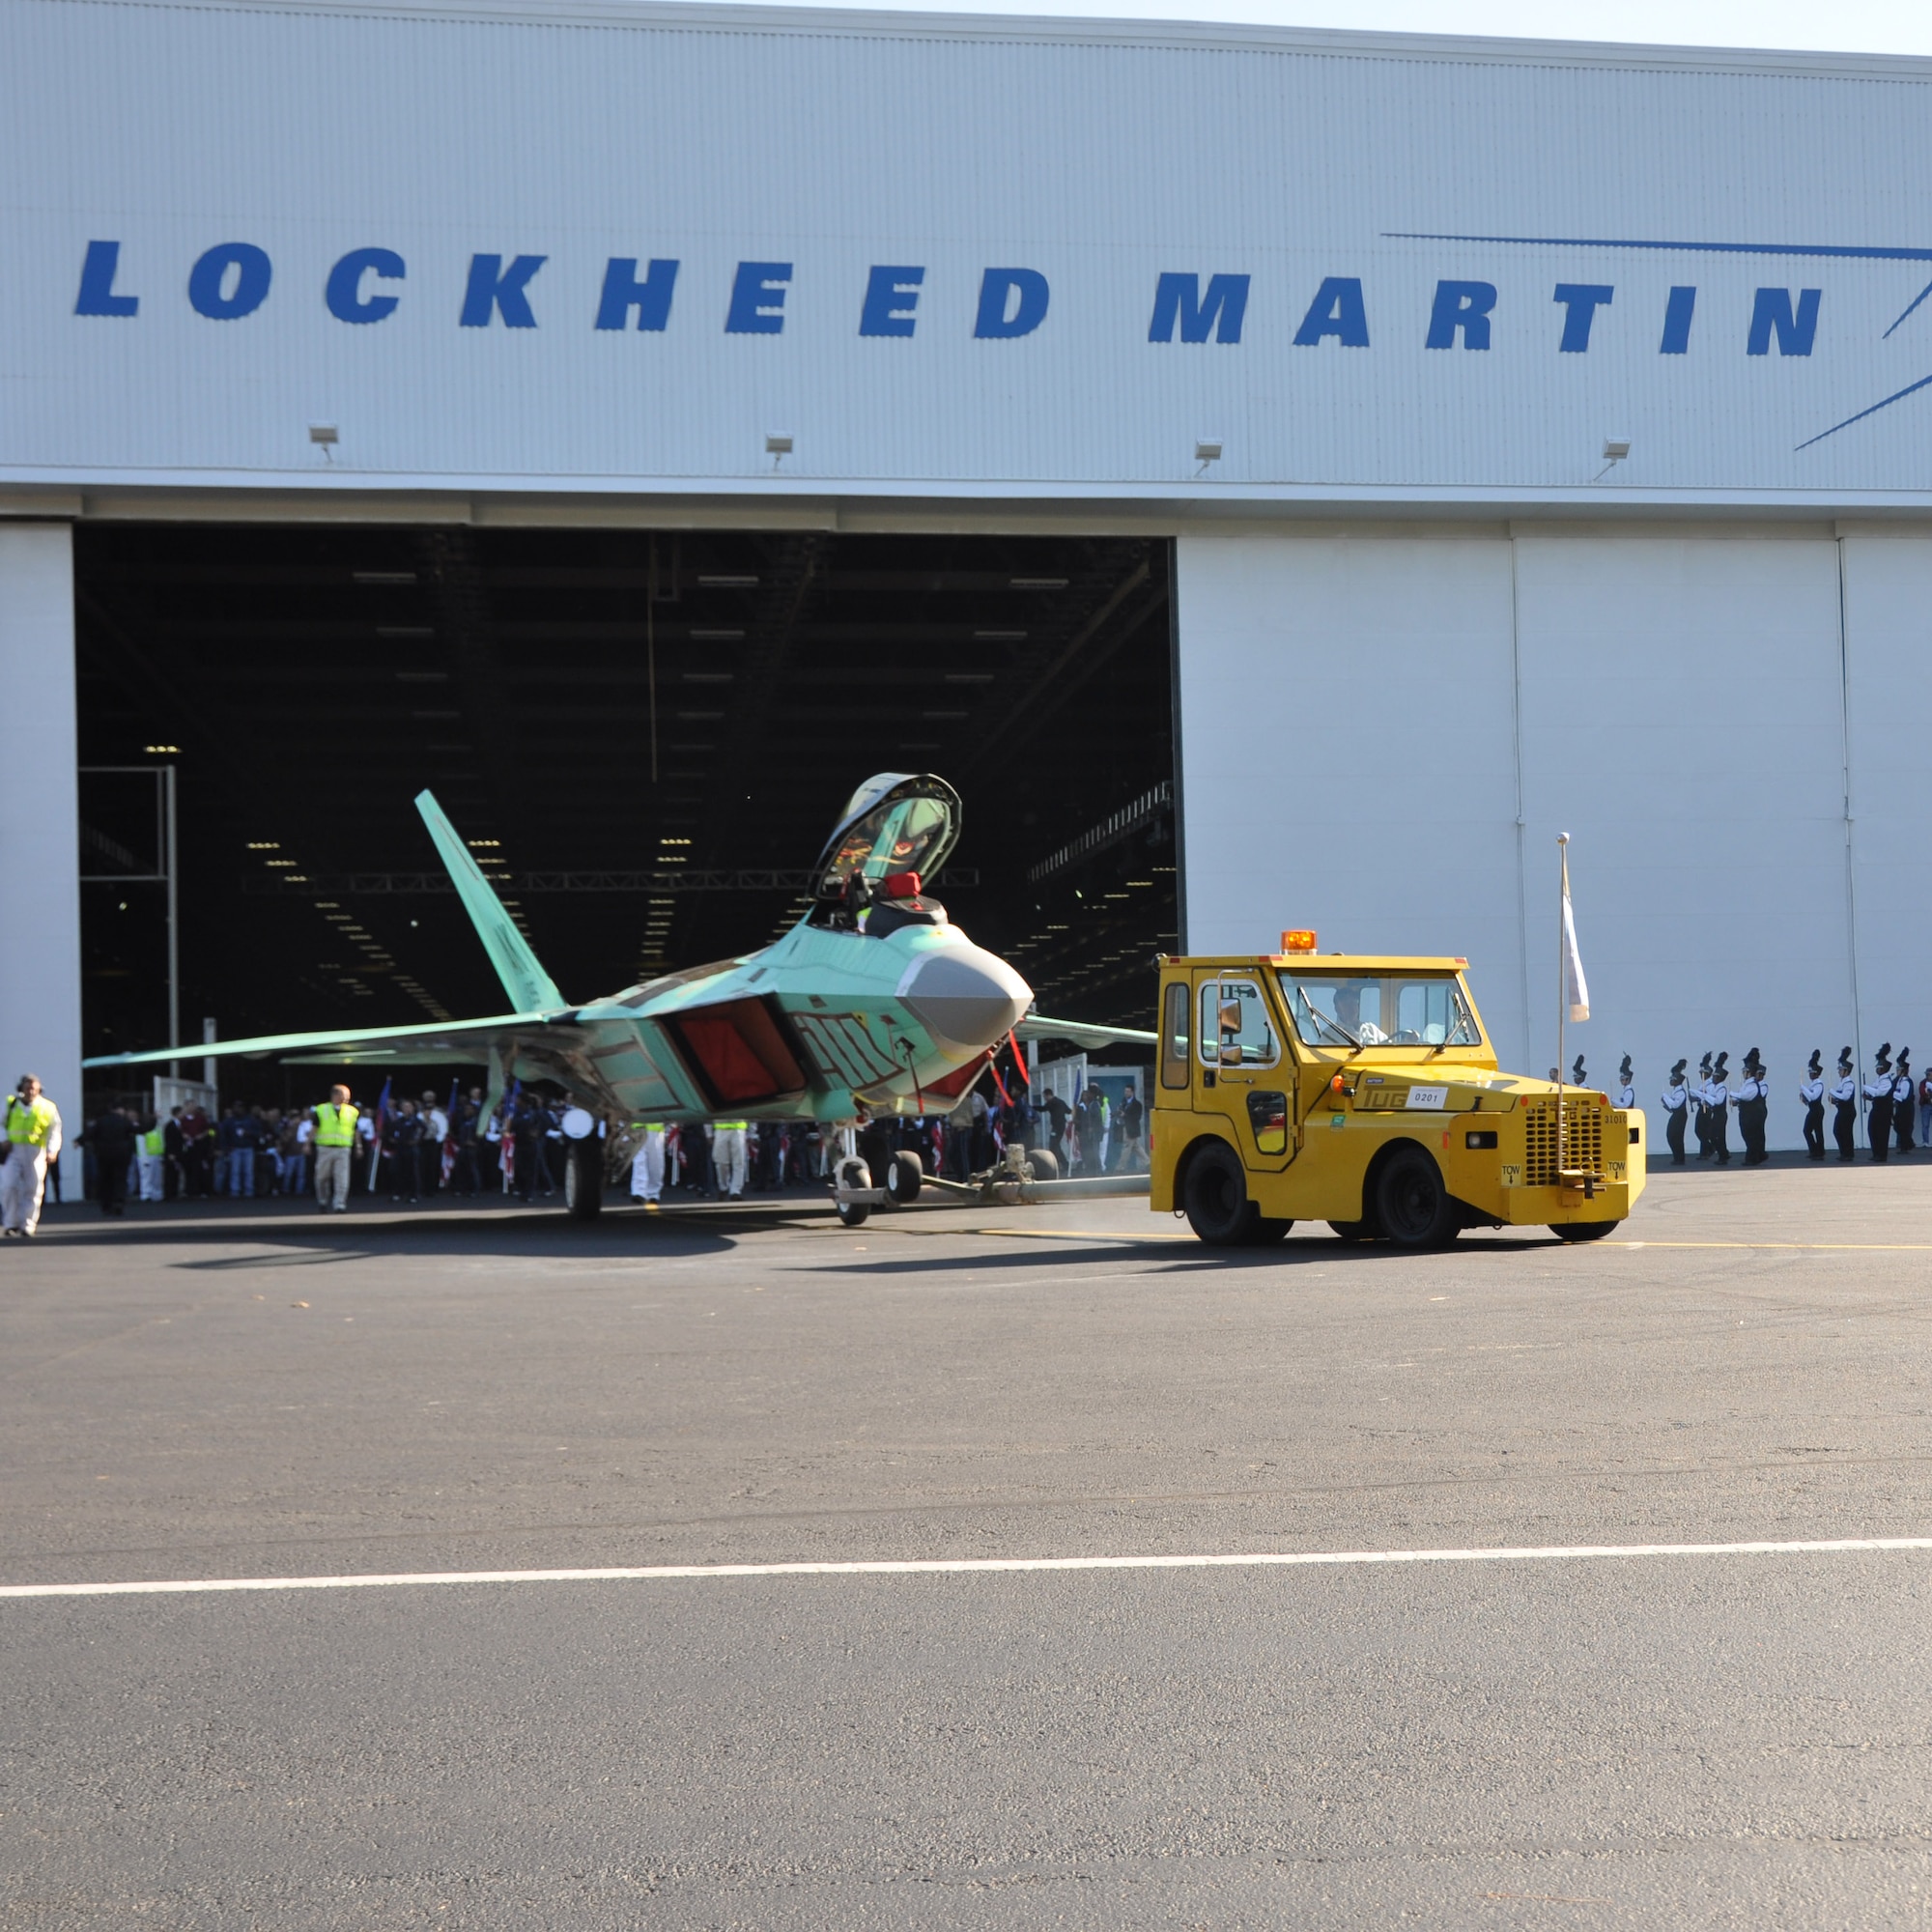 The final F-22 Raptor fighter jet is  rolled off the Lockheed Martin assembly line at a ceremony at the Marietta, Ga. plant Dec. 13.  The jet is the last of 187 F-22s produced for the Air Force completing its operational fleet. (U.S. Air Force photo/ Senior Airman Danielle Purnell)